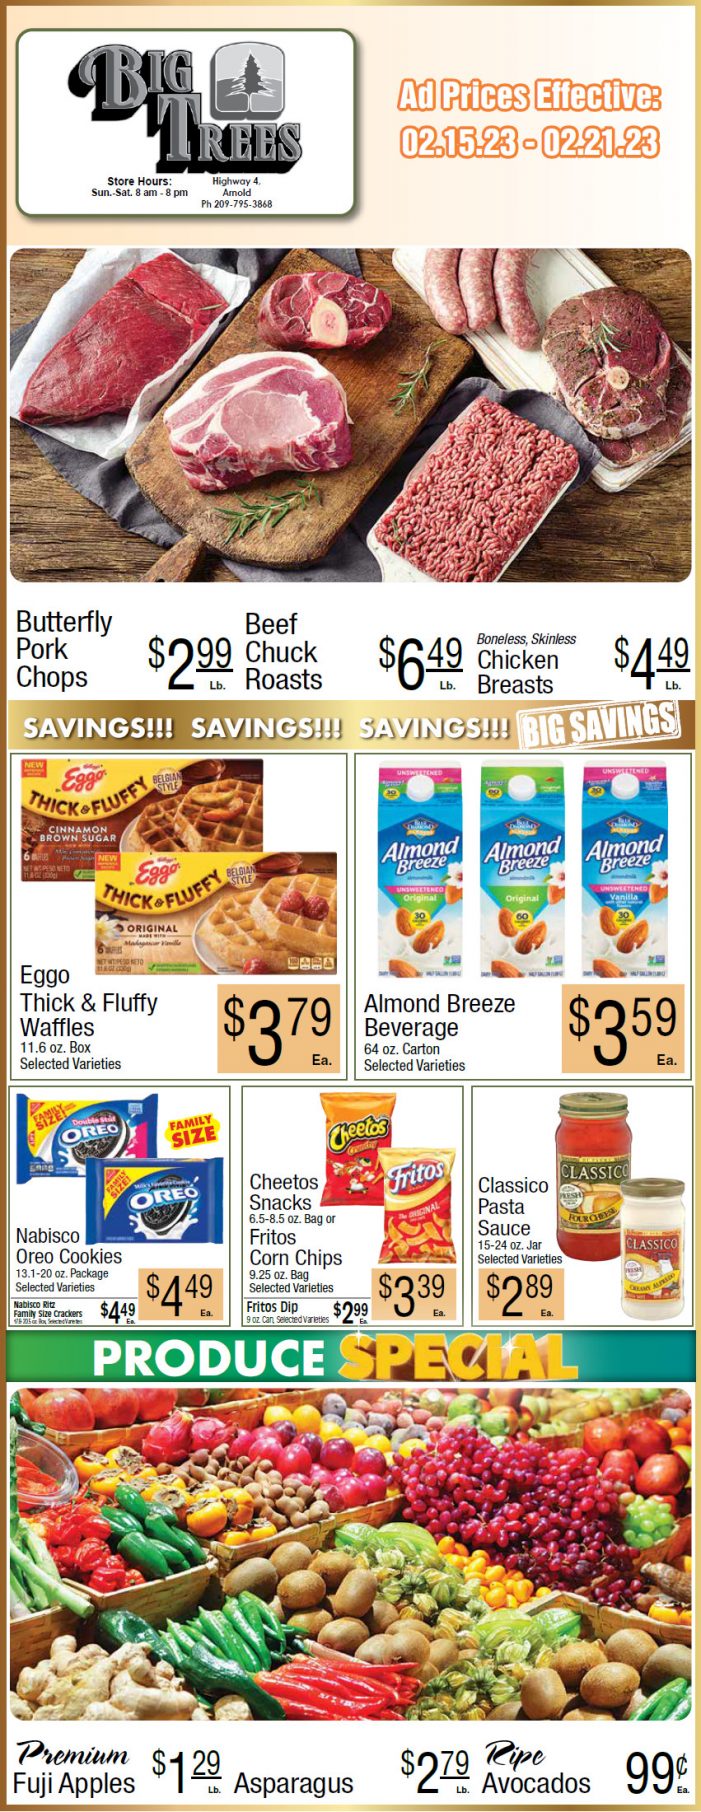 Big Trees Market Weekly Ad & Grocery Specials February 15 – 21st!  Shop Local & Save!!